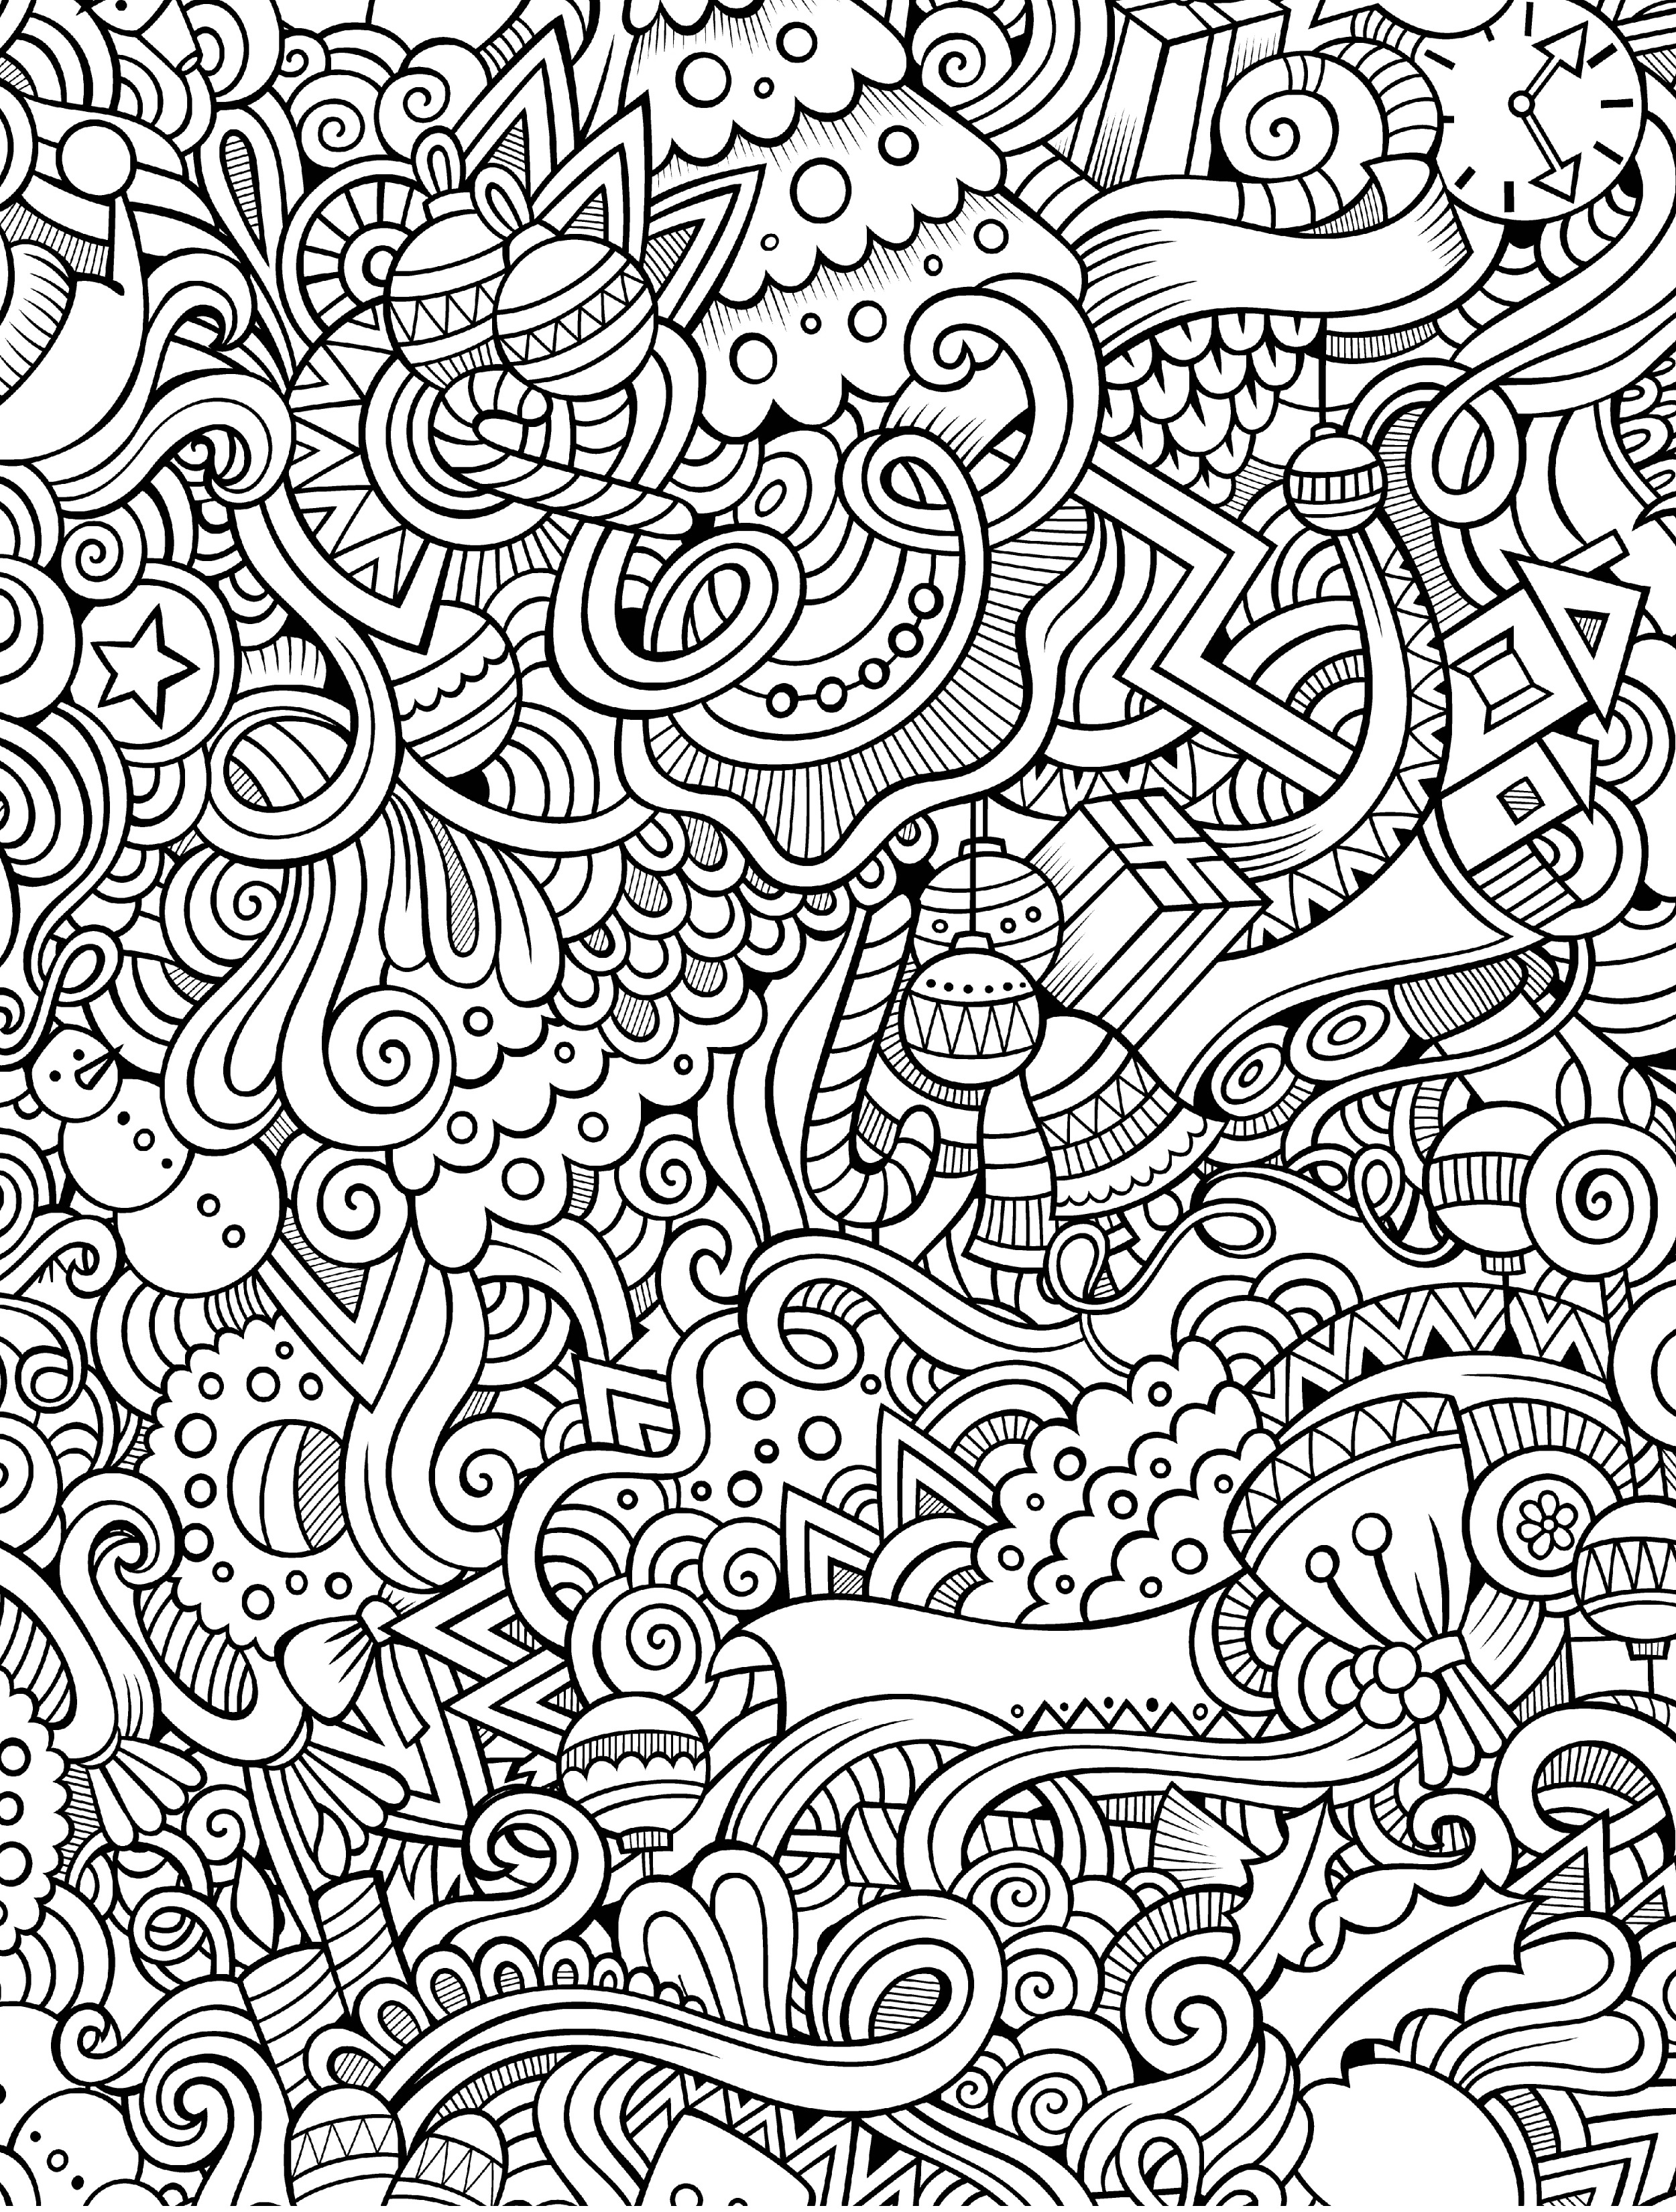 Free Coloring Pages Pdf Format at GetColorings.com | Free printable